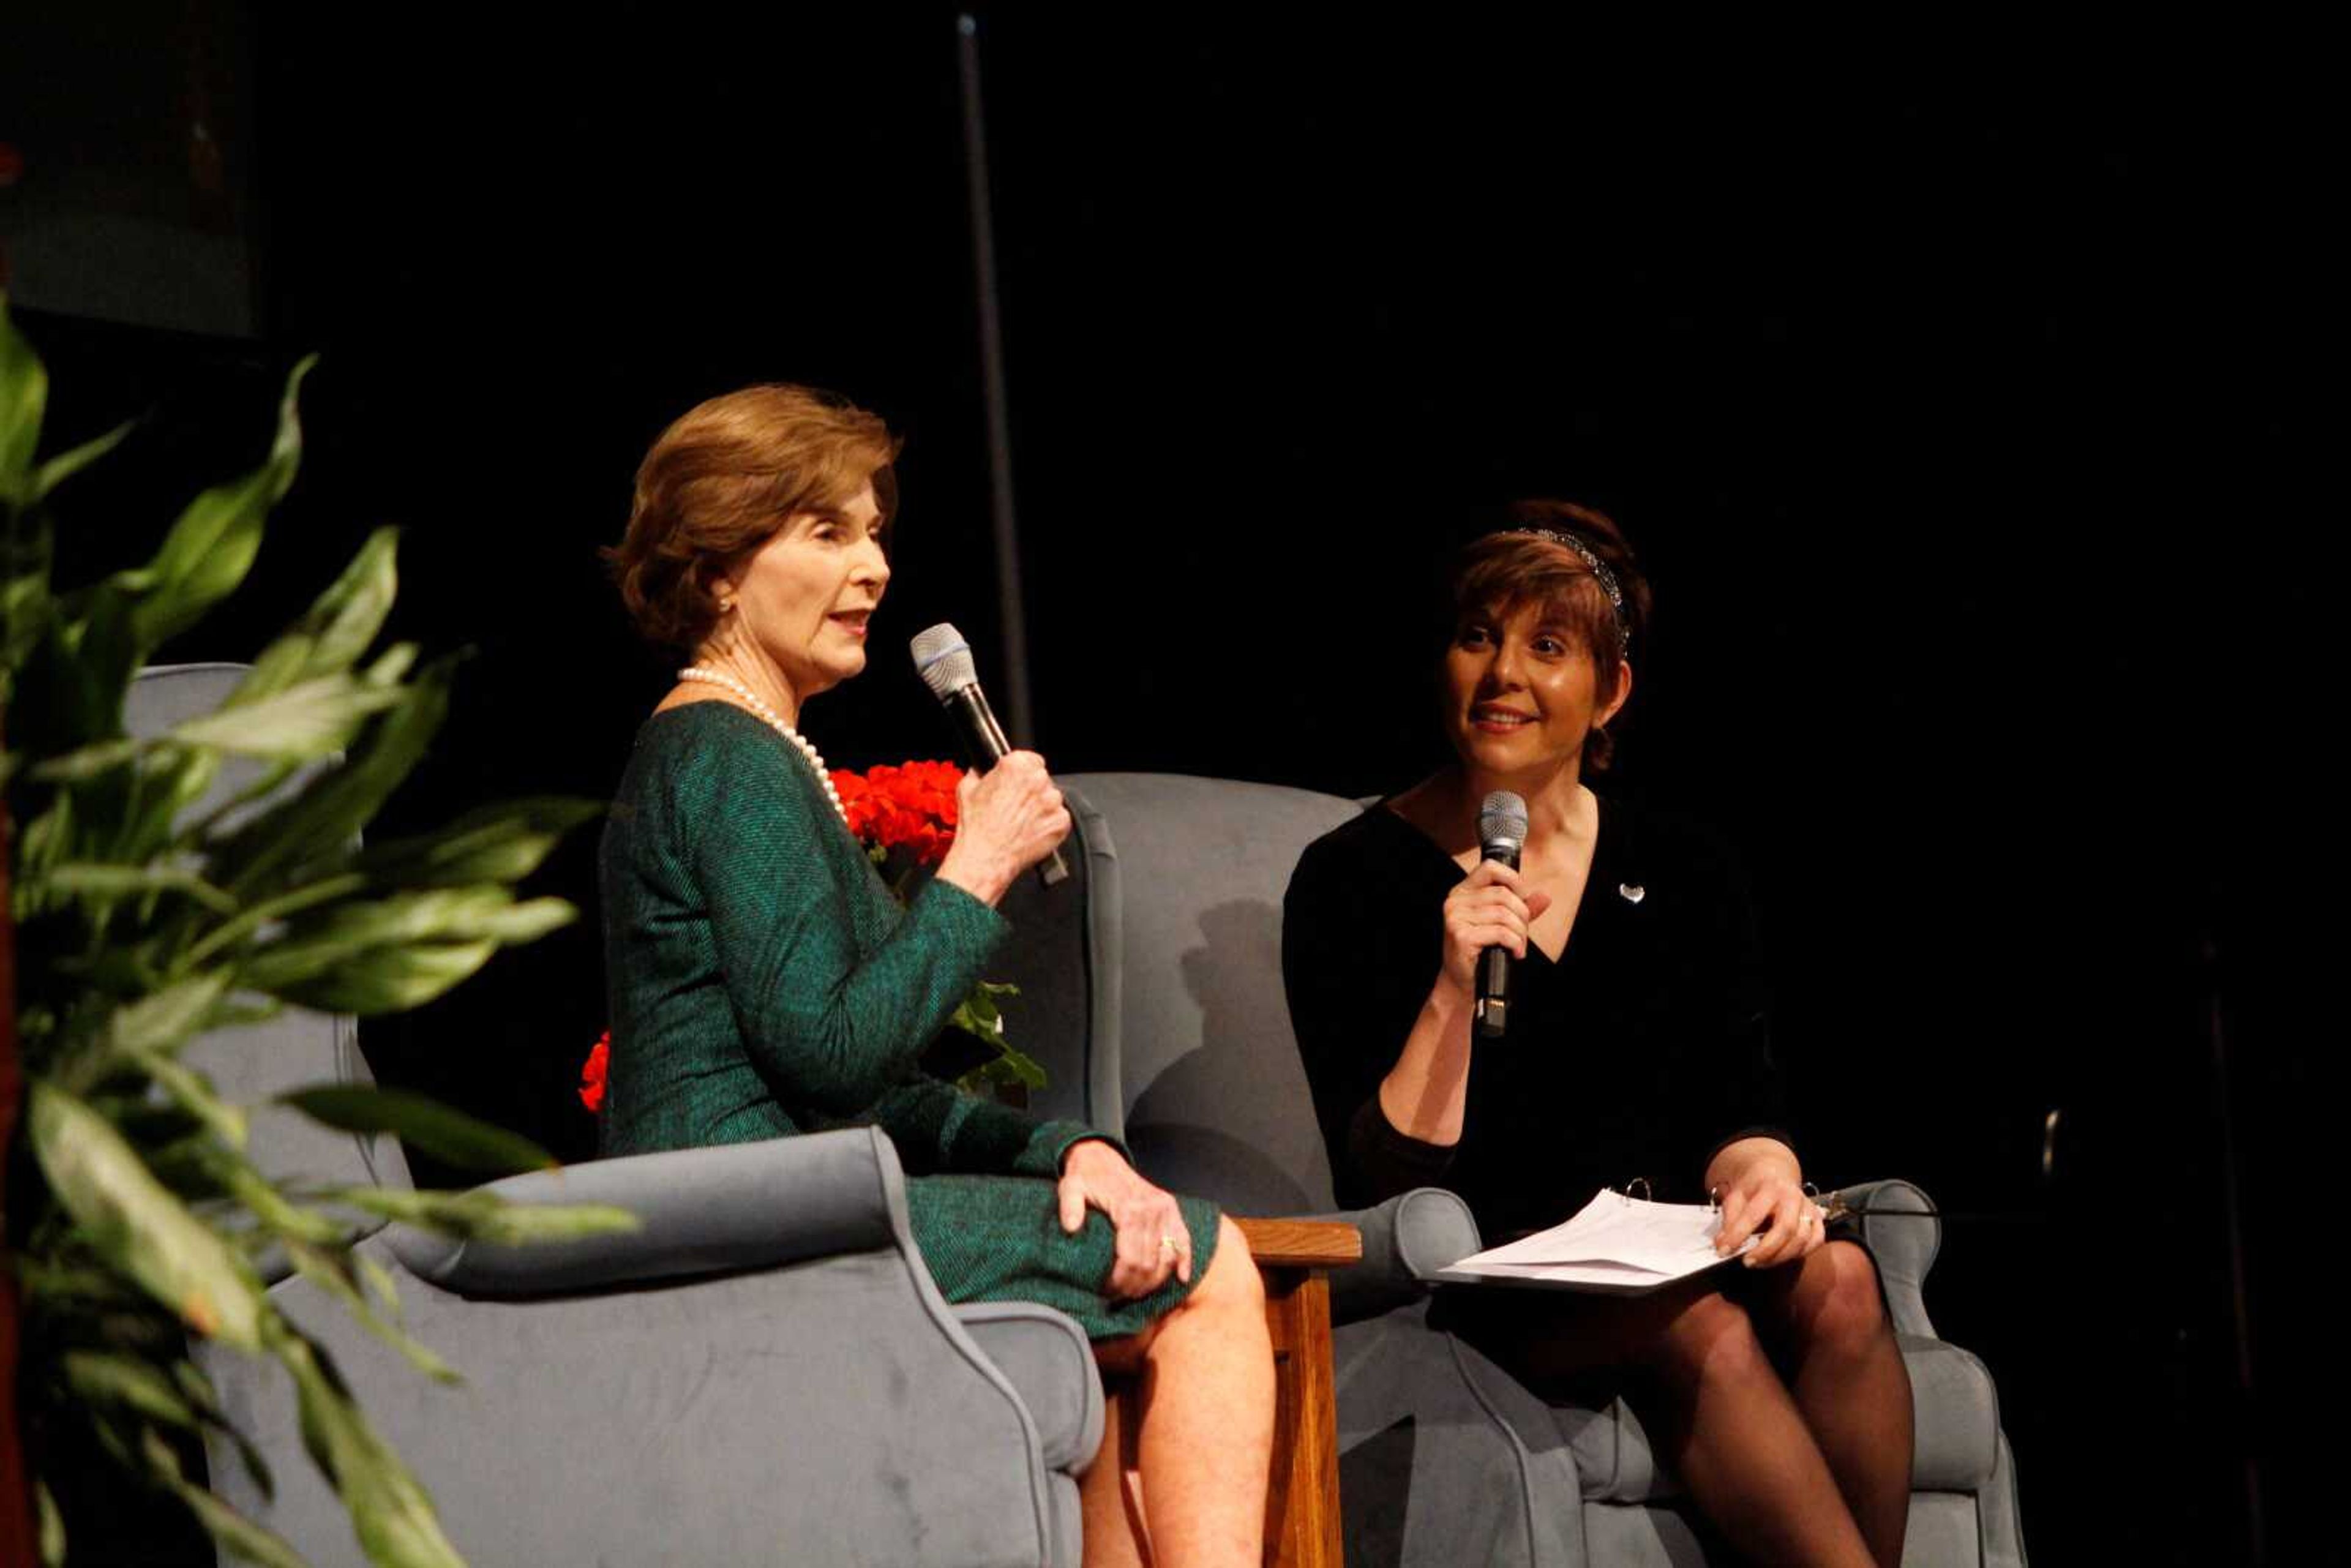 During a Q&A, Laura Bush answers a question at the “Evening with Laura Bush” event on Feb. 21 in the Show Me Center.